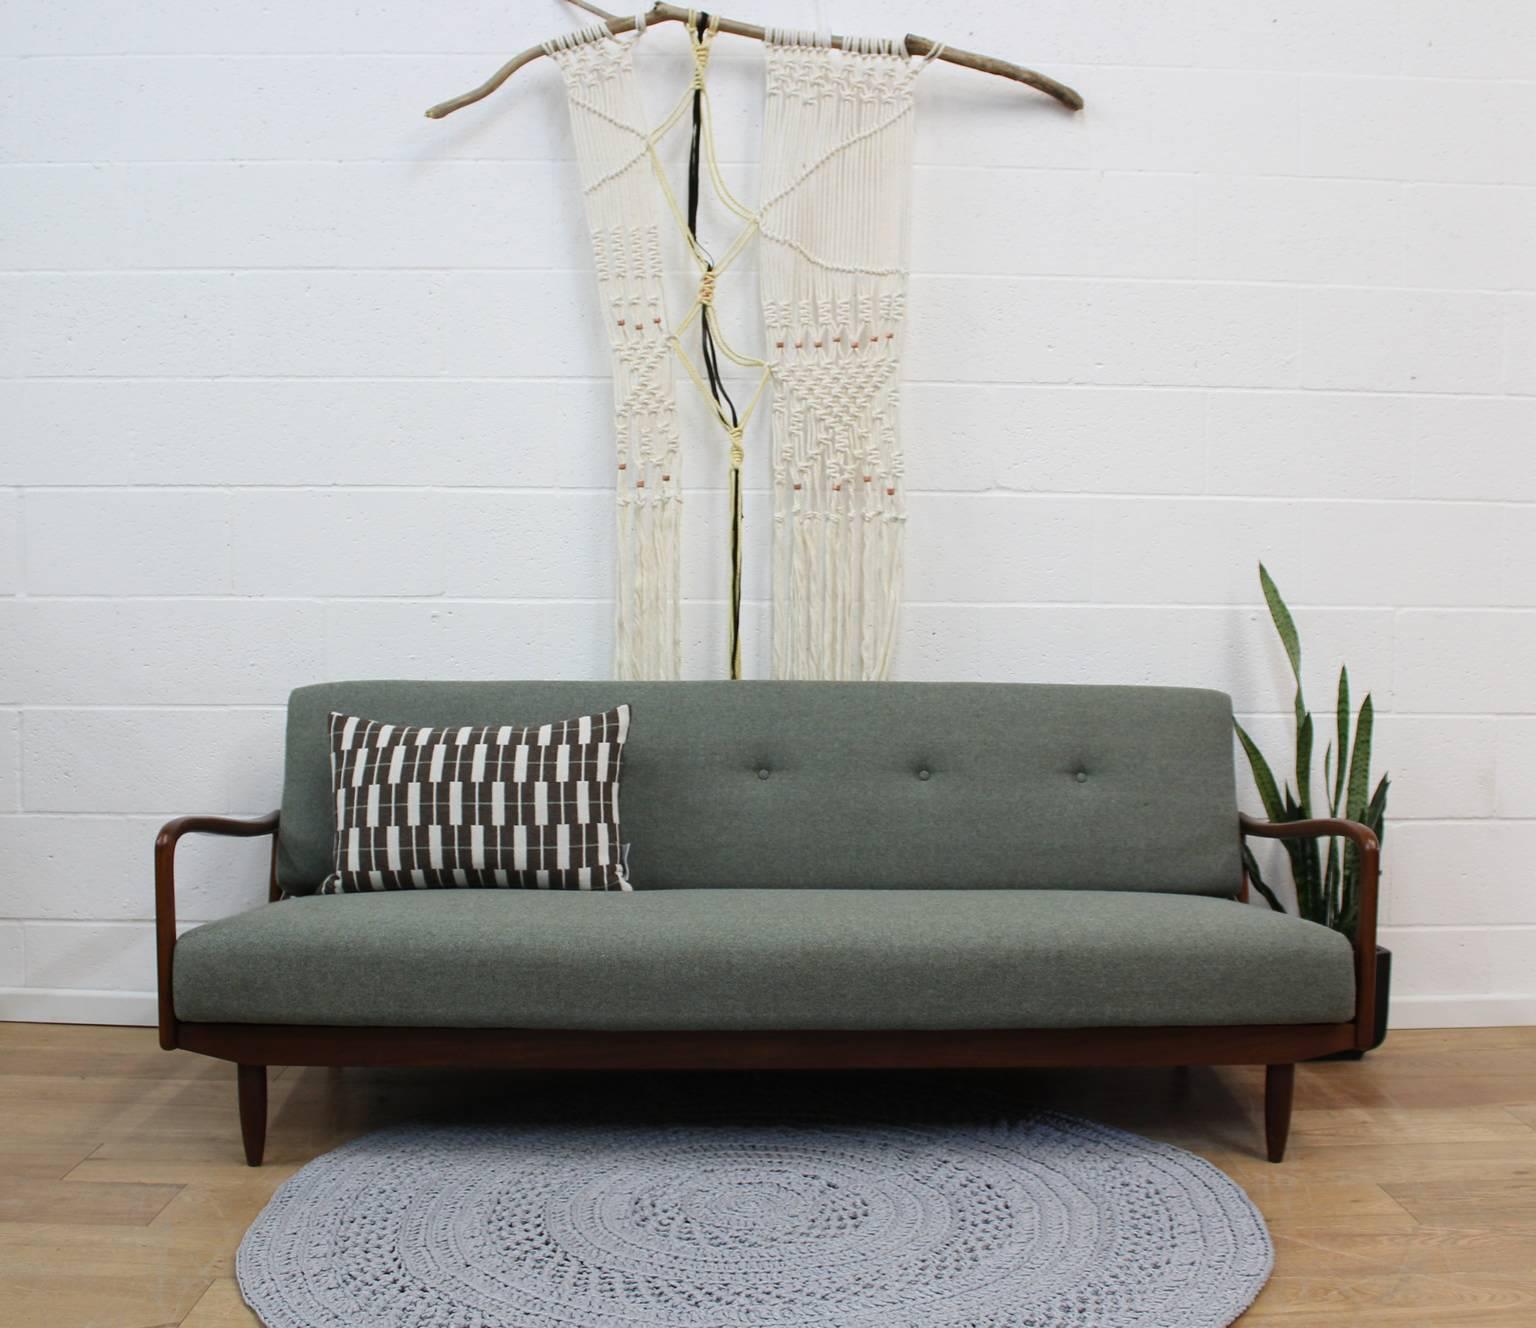 British Greaves & Thomas Midcentury Sofa Bed with Teak Arms, Fully Restored in Wool